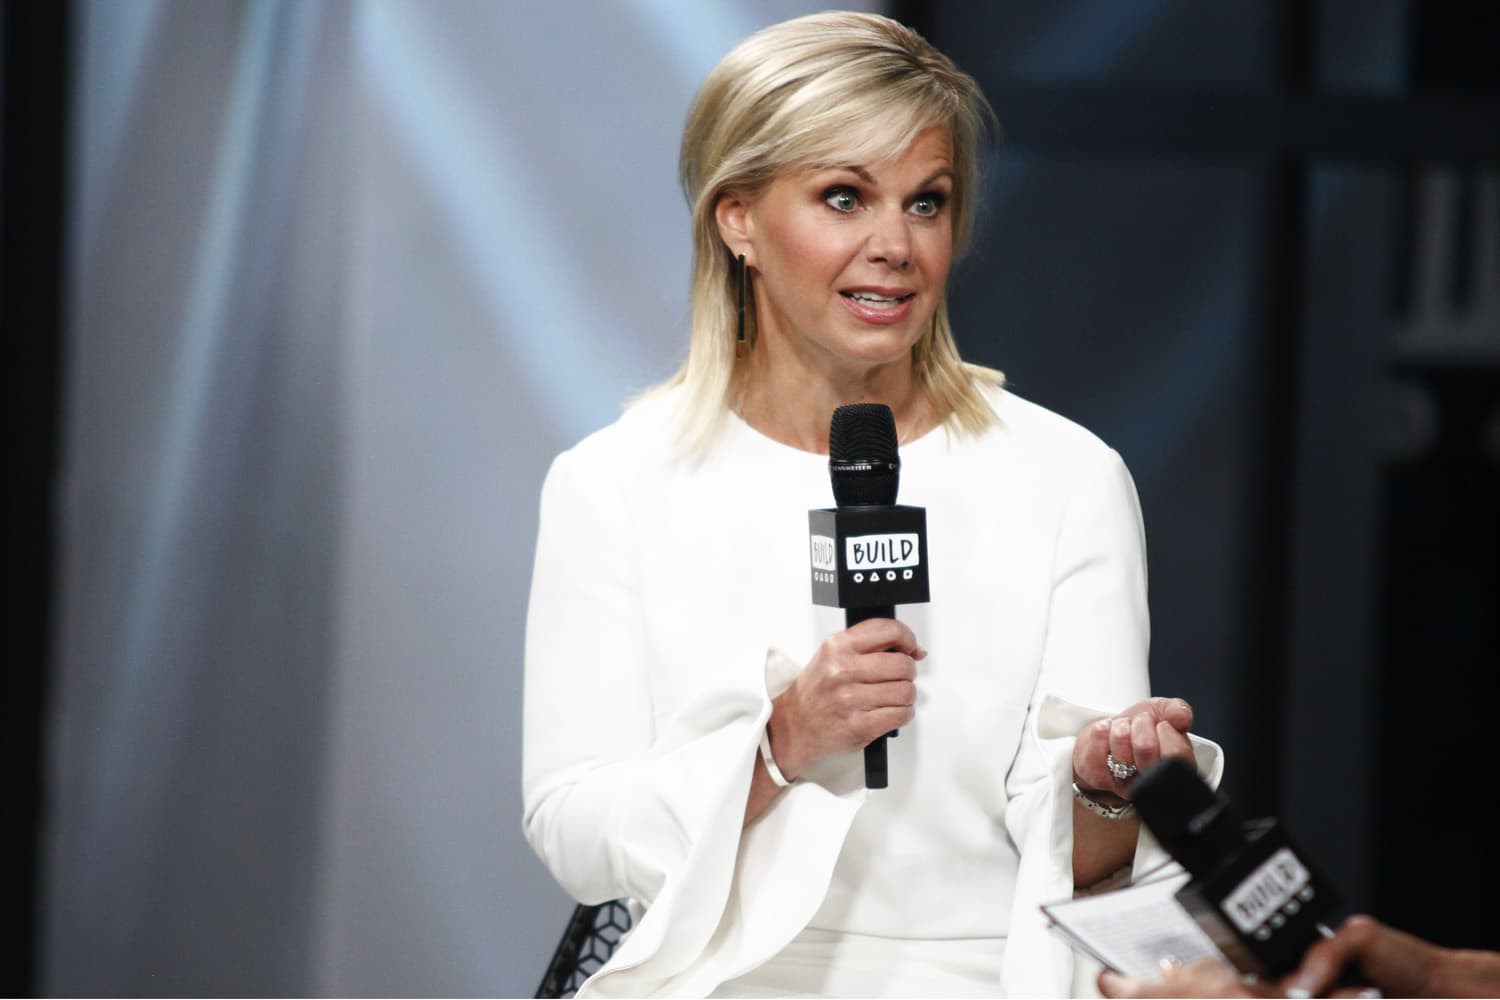 Gretchen Carlson speaks earlier this month in New York. (Andy Kropa/AP)